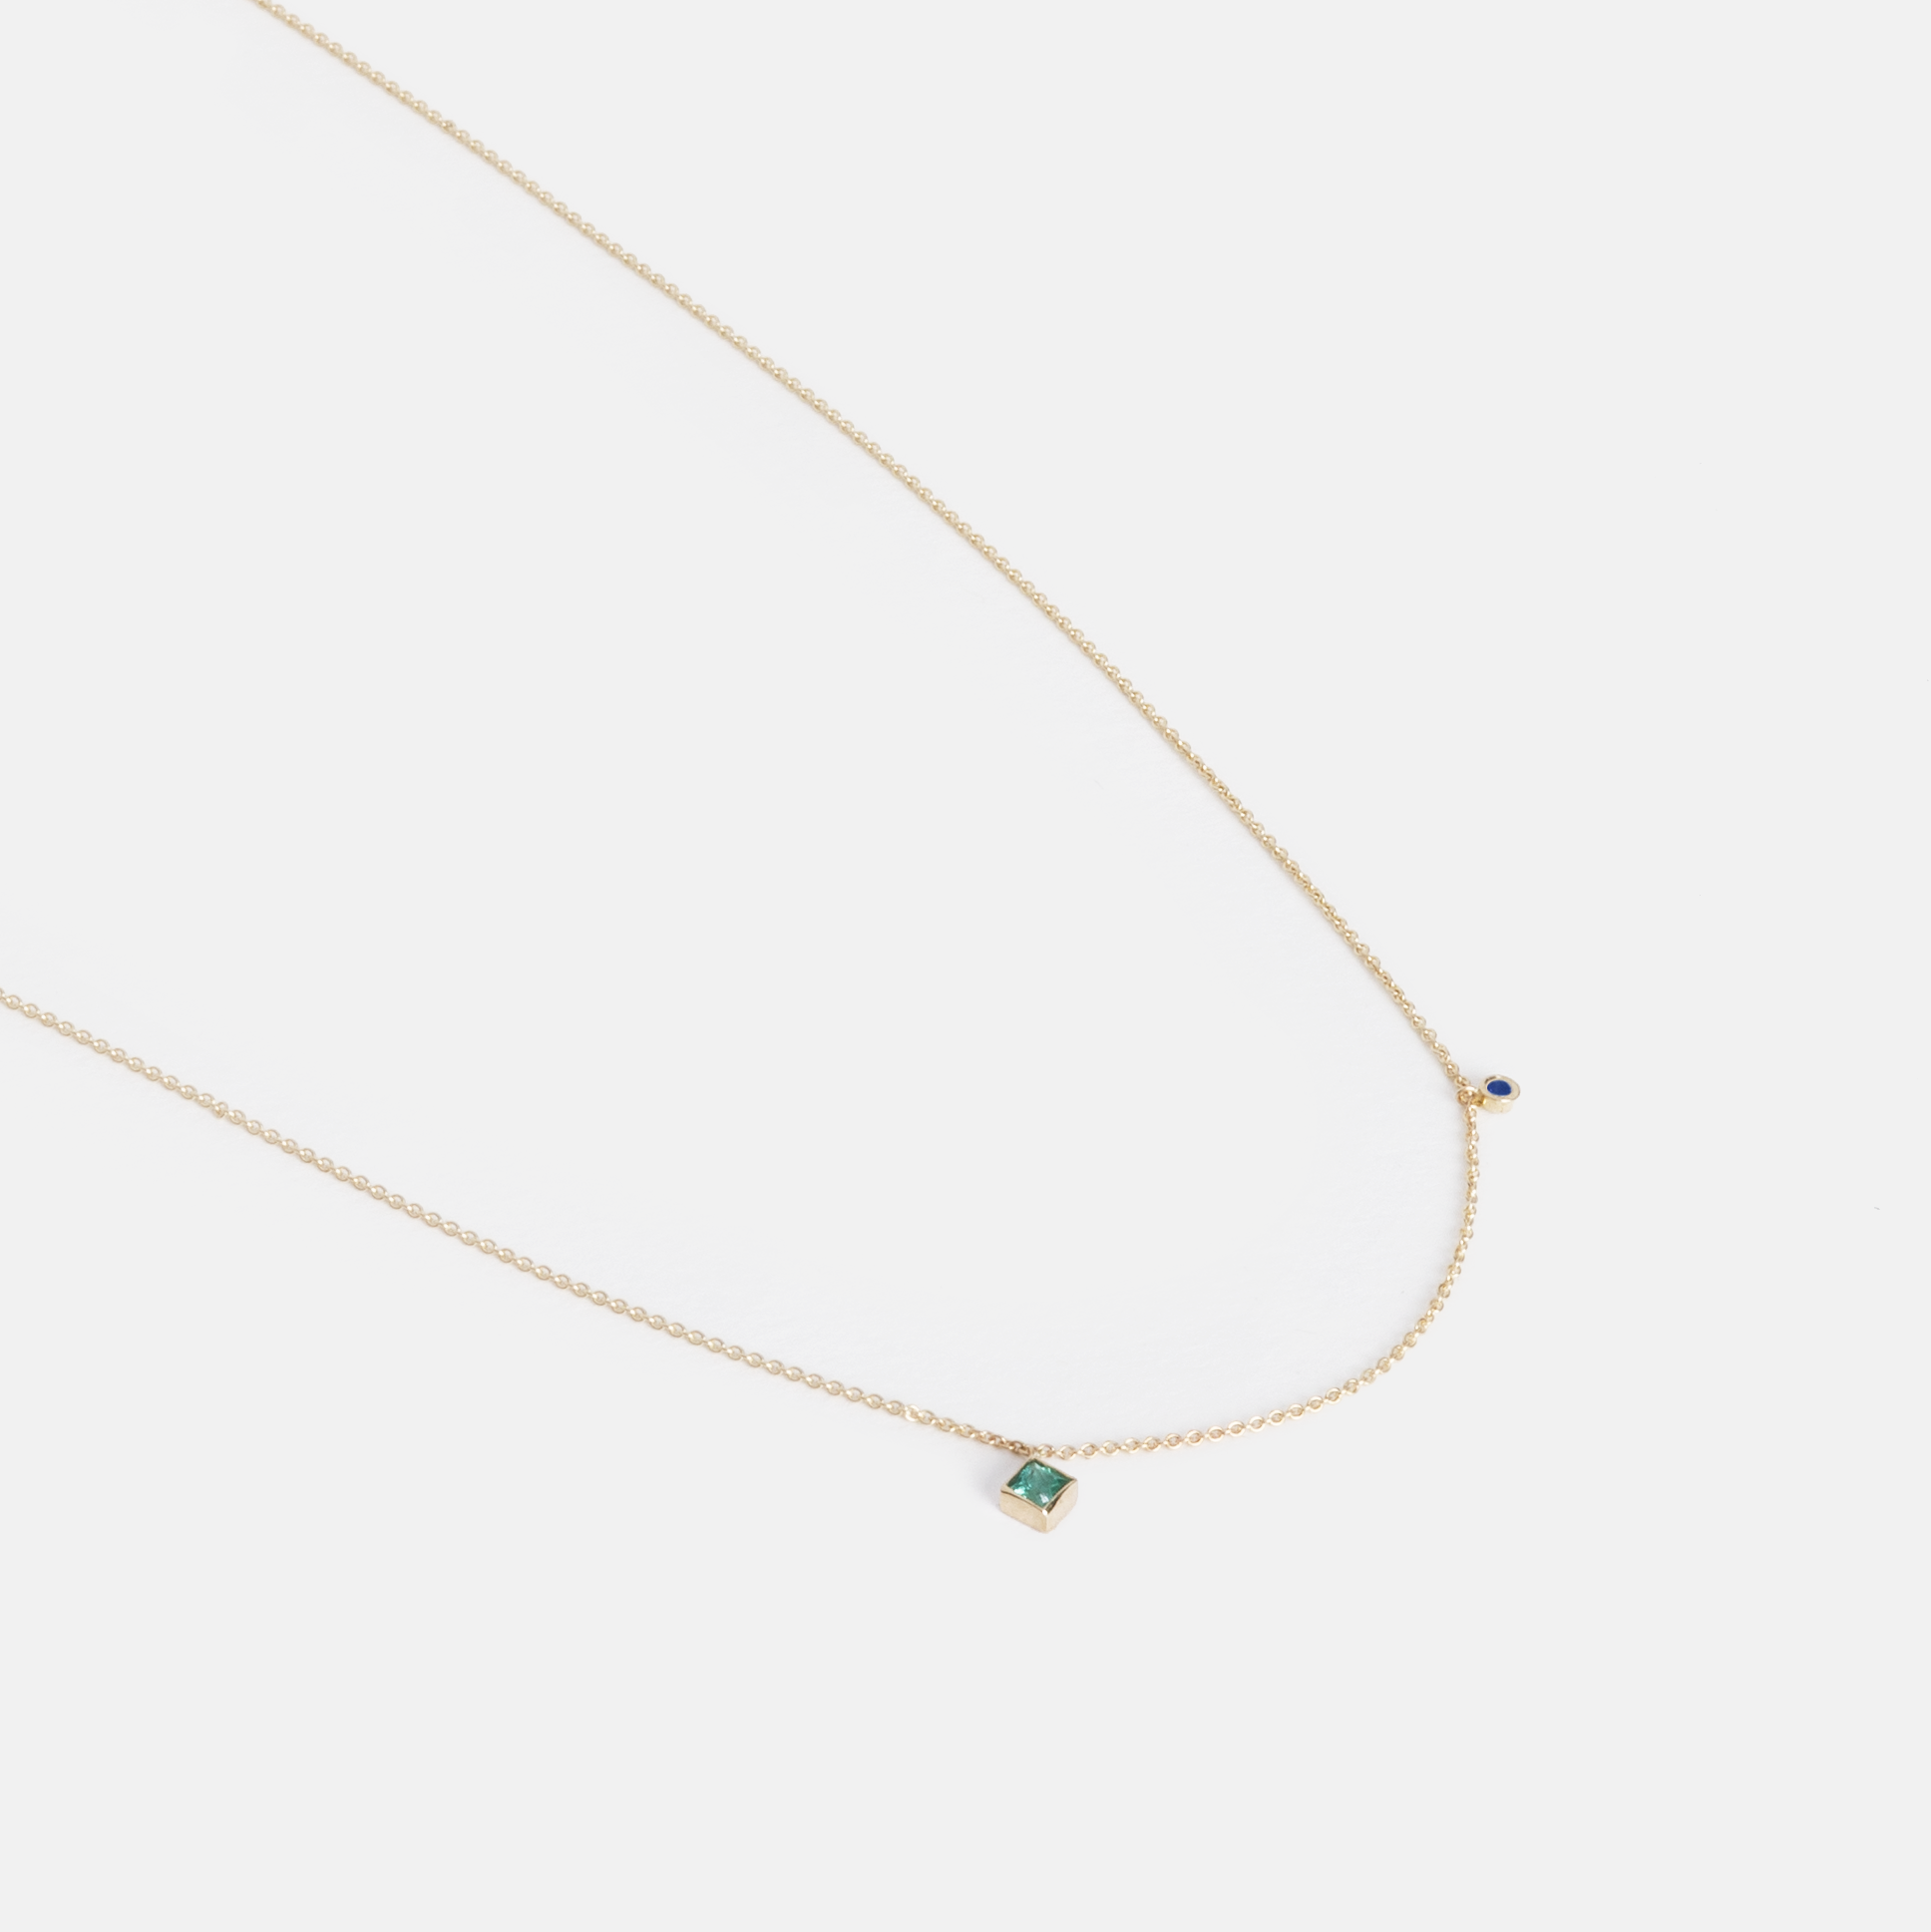 Ibi Delicate Necklace in 14k Gold set with Emerald and Sapphire By SHW Fine Jewelry NYC